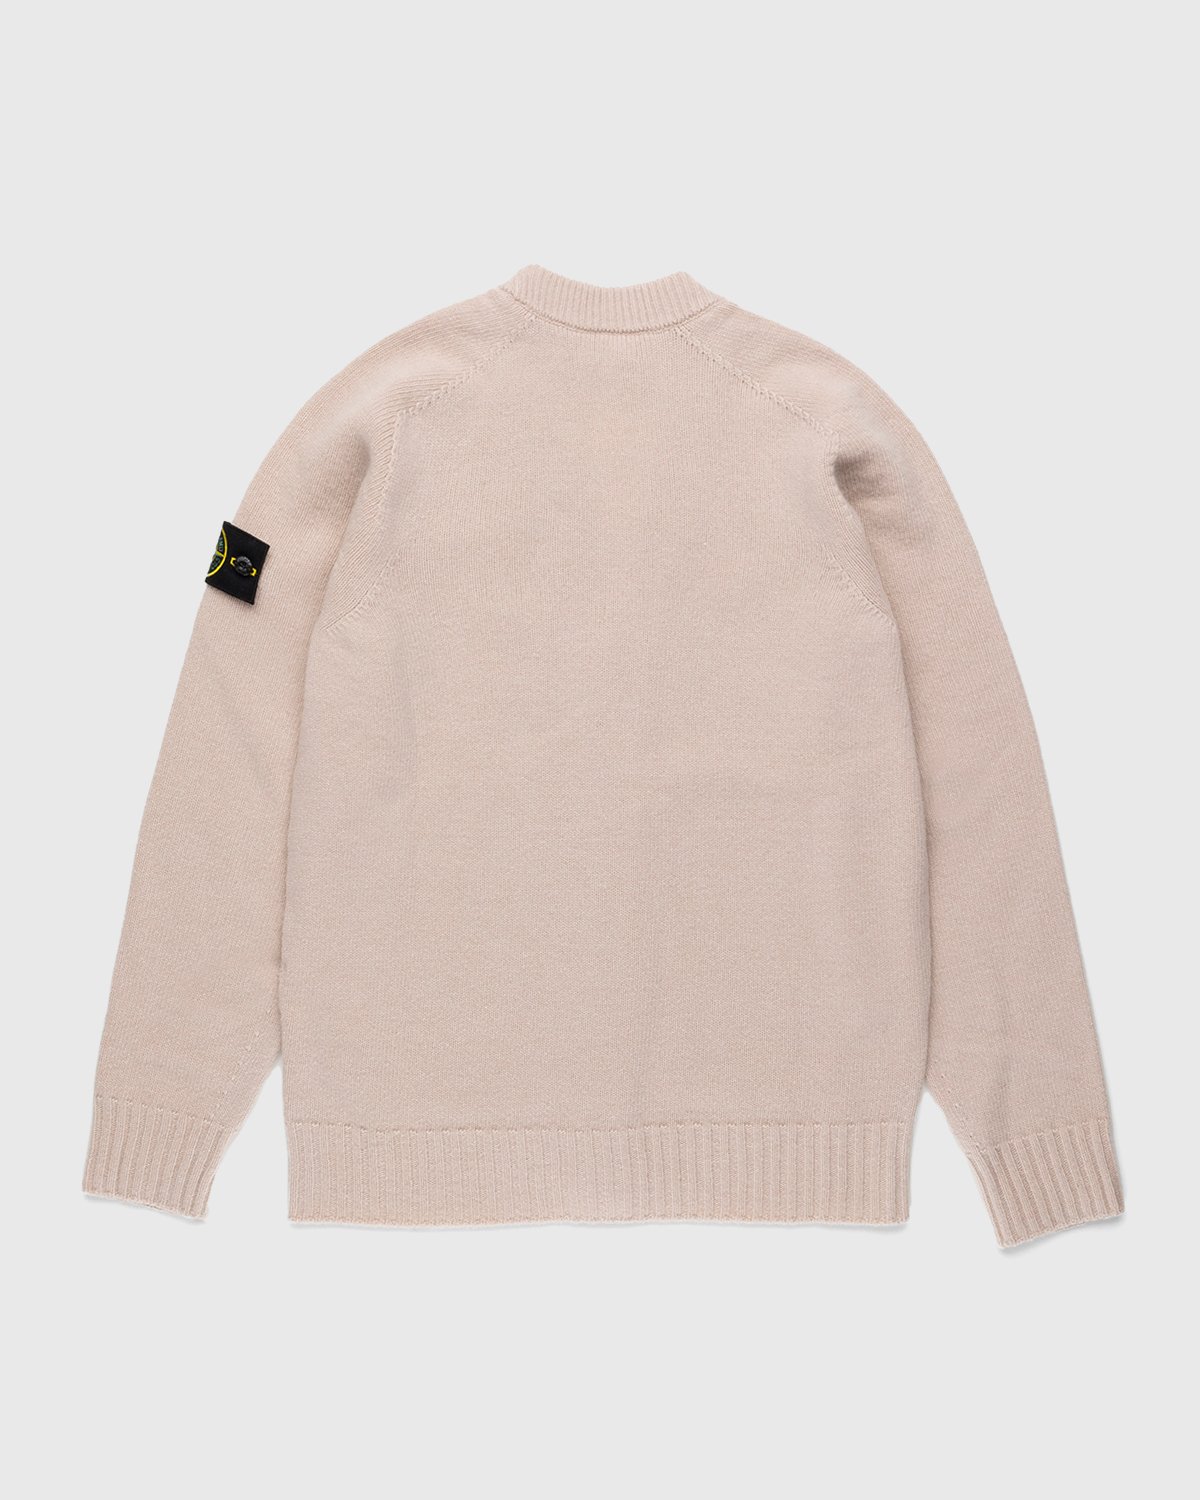 Stone Island - Knitted Cardigan Rustic Rose - Clothing - Red - Image 2